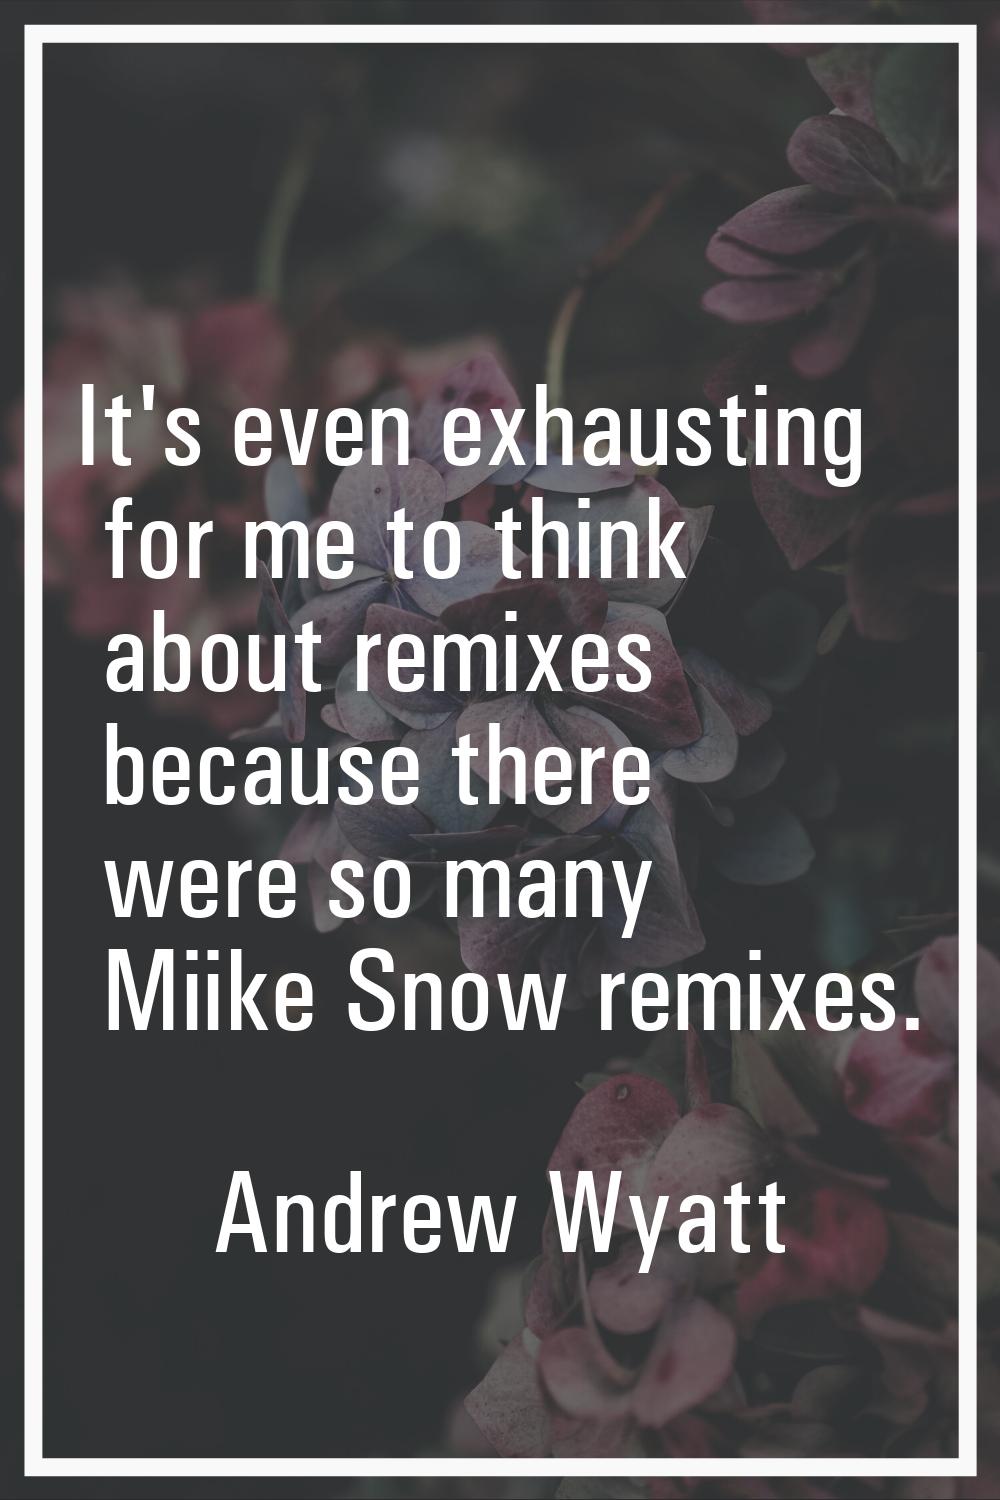 It's even exhausting for me to think about remixes because there were so many Miike Snow remixes.